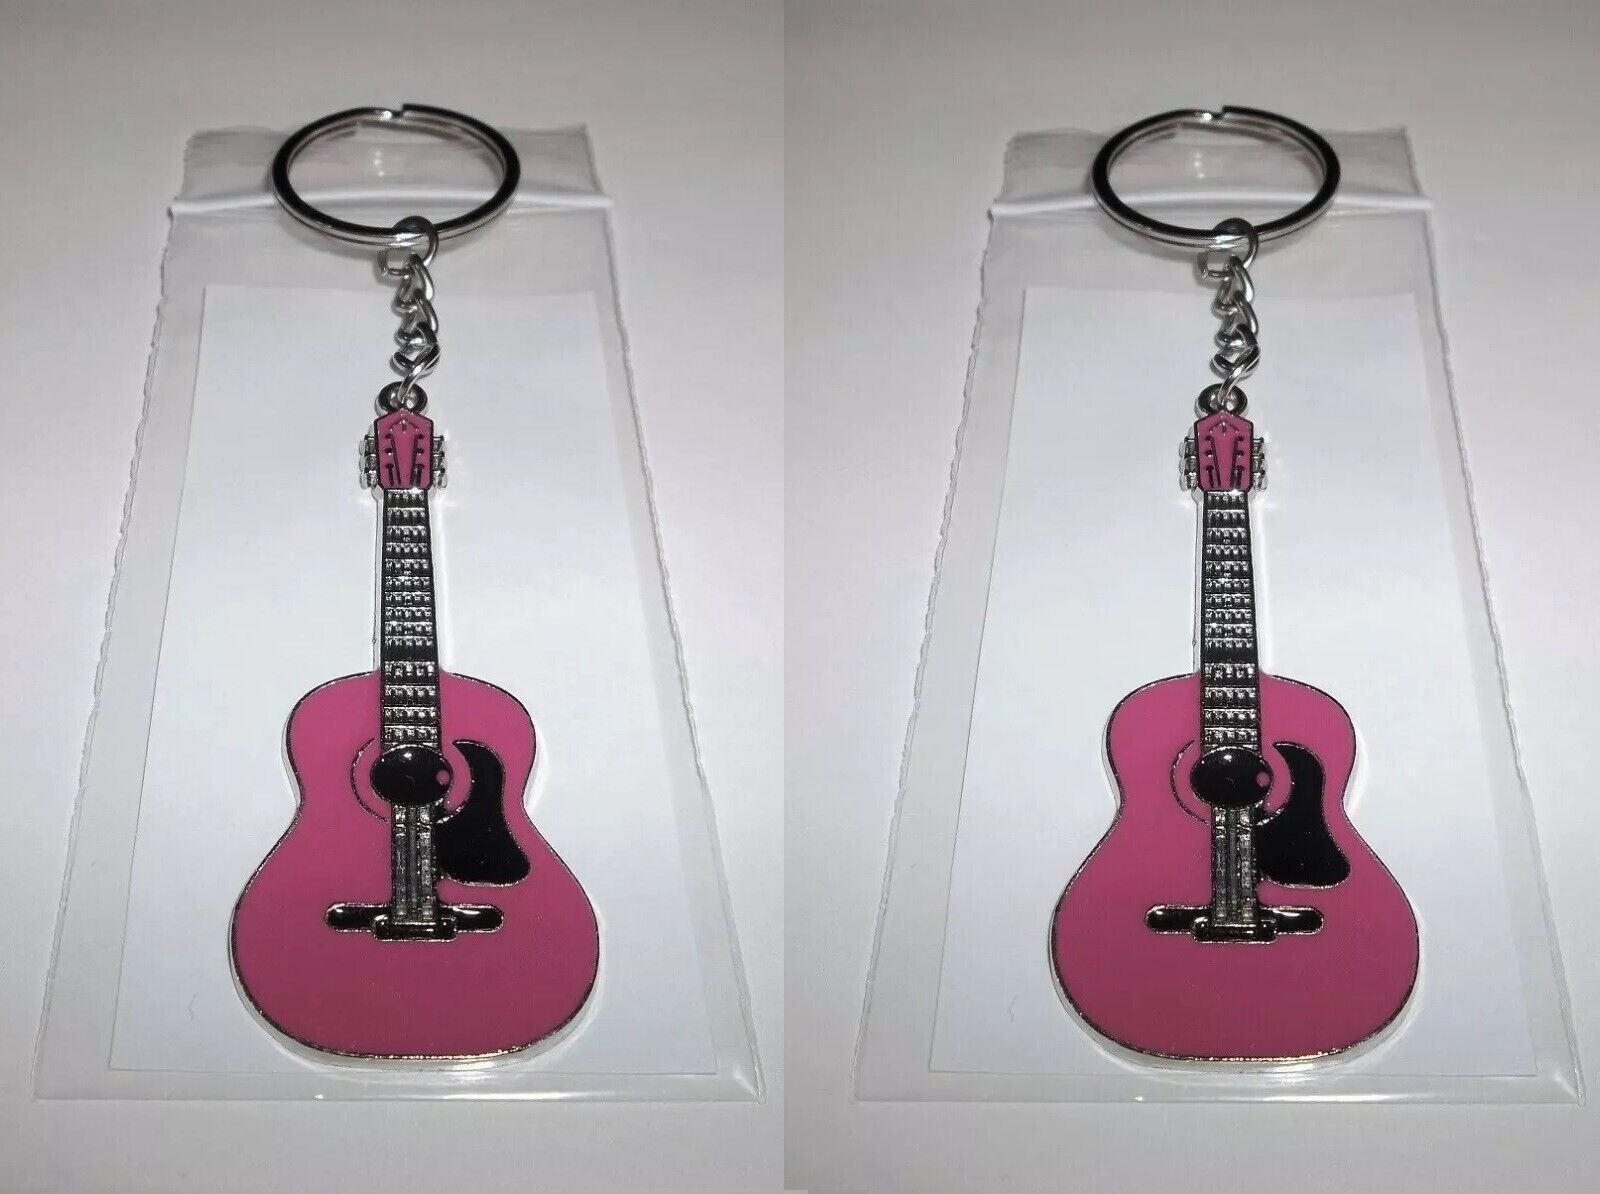 2 Lot-Pink Acoustic Guitar Keychains-Instrument Keyrings Music Band Player New